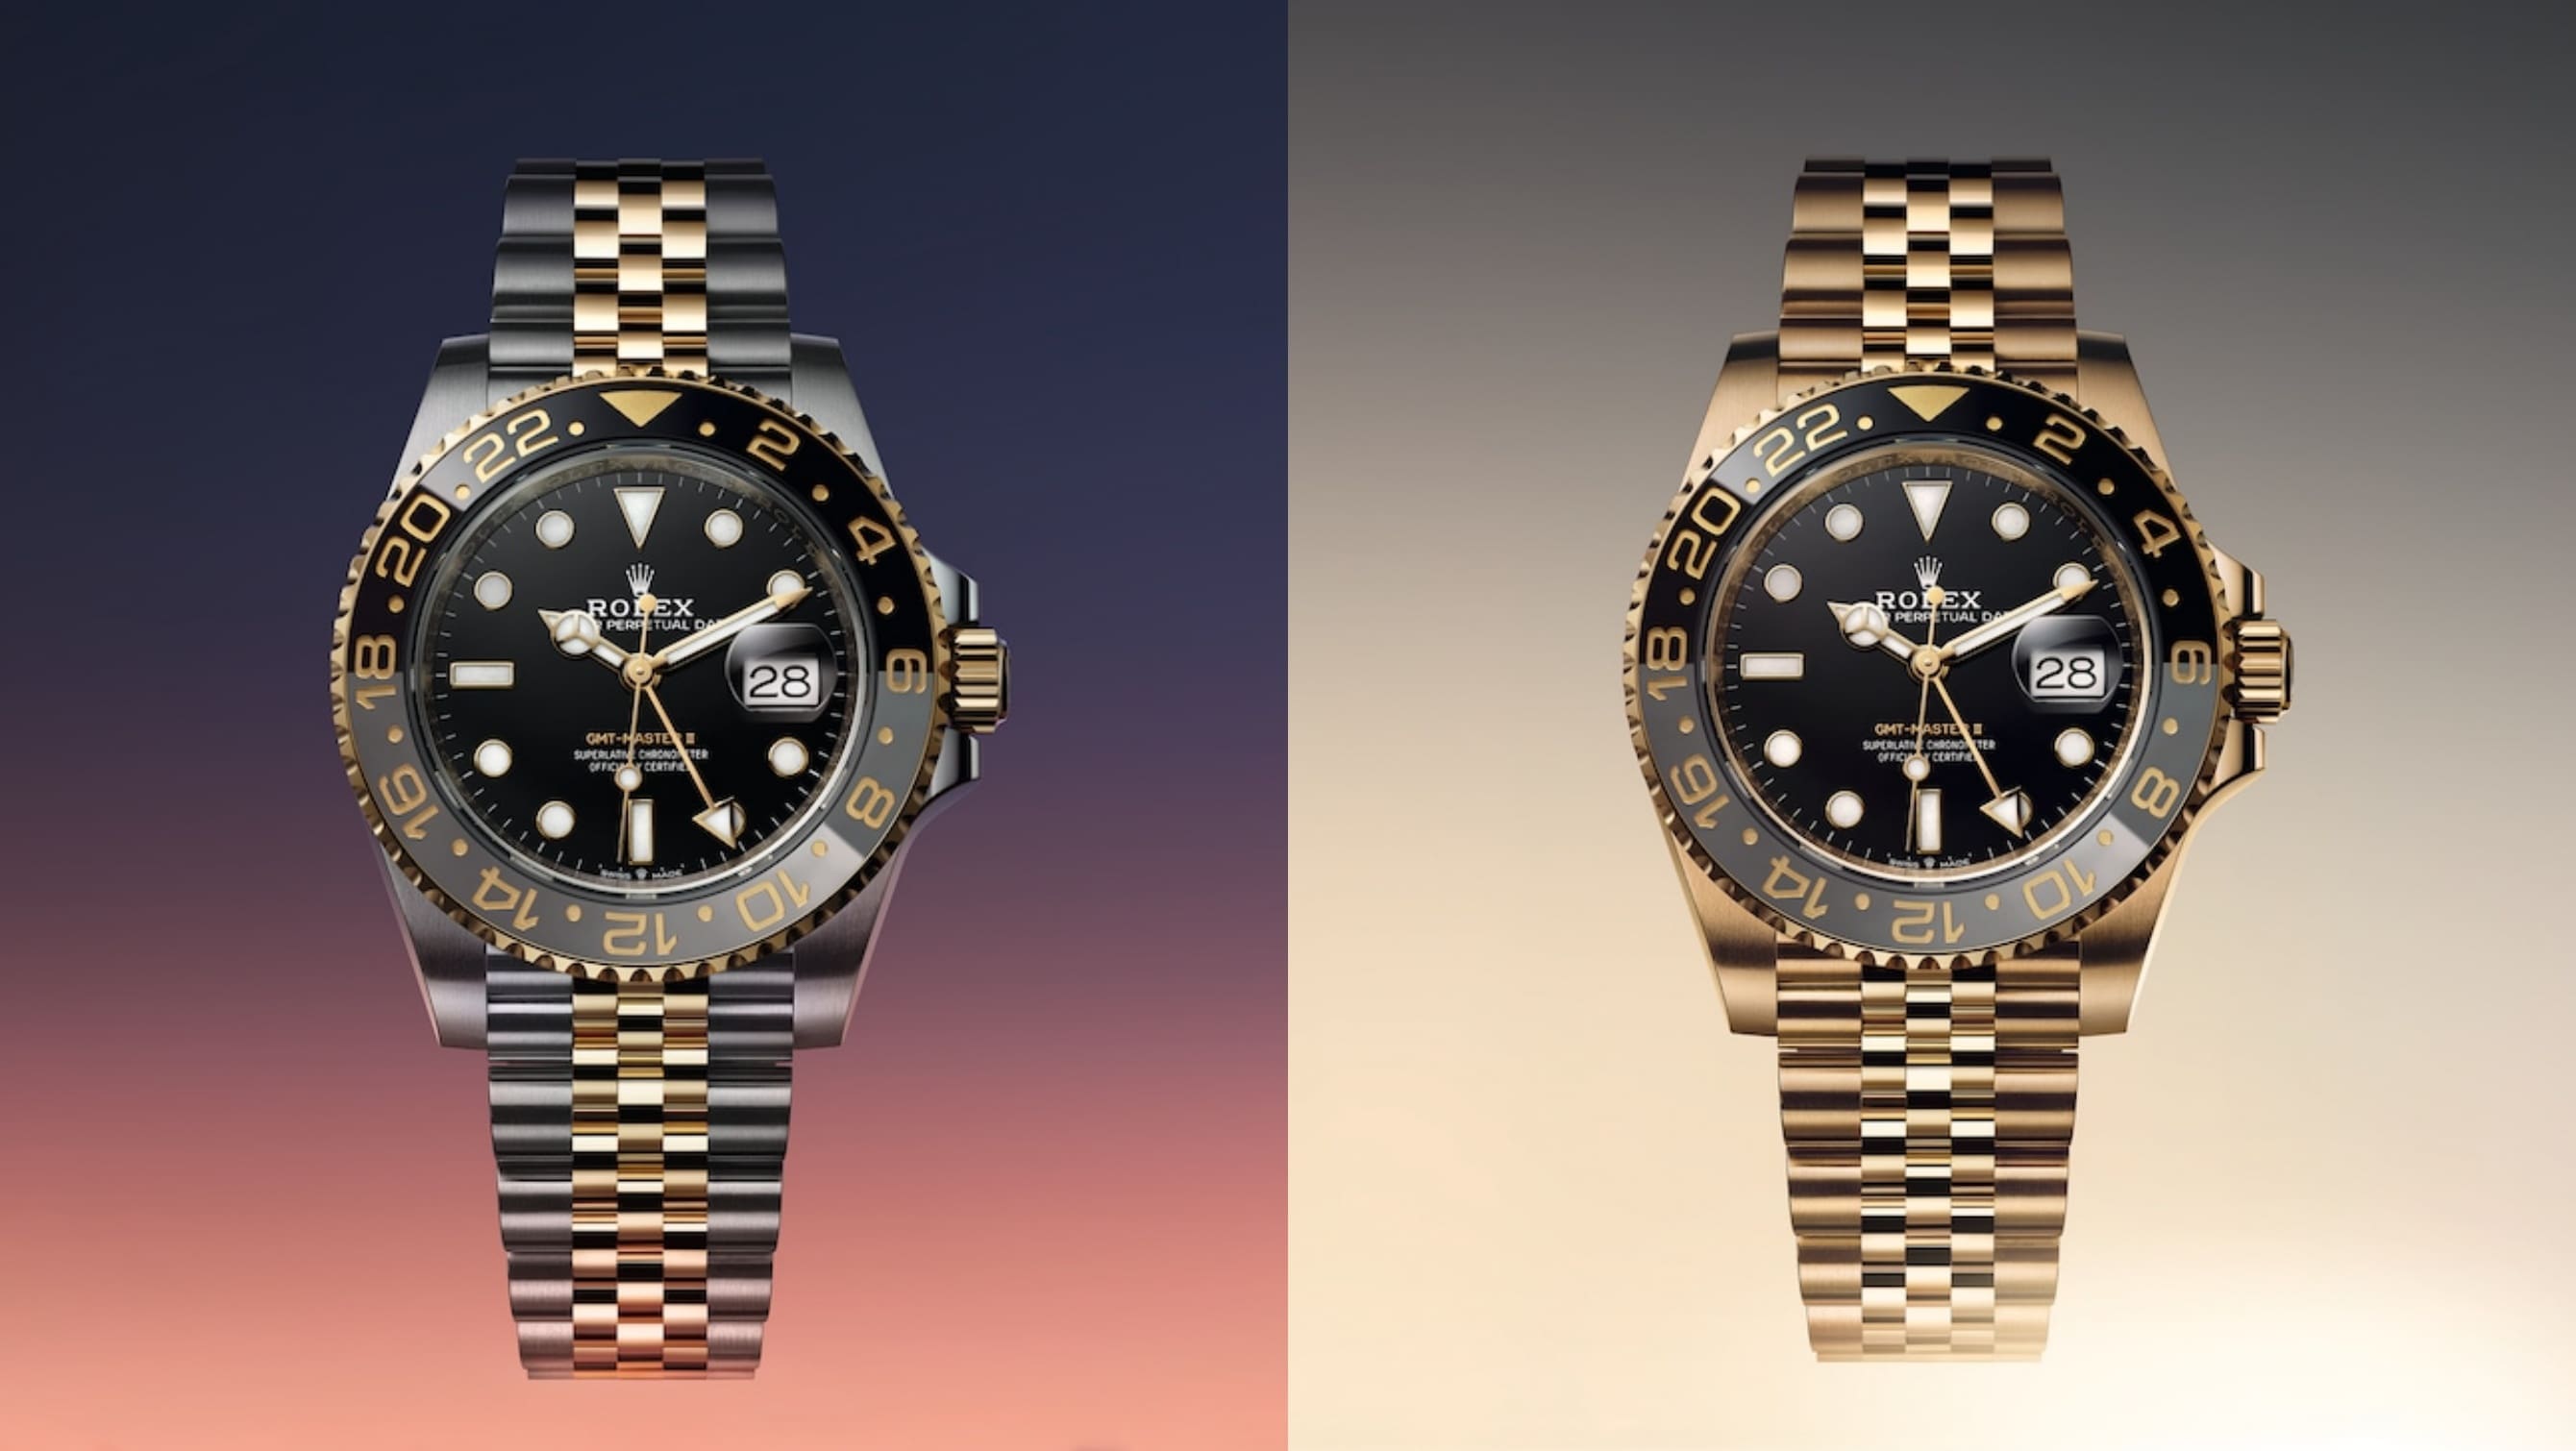 Gold rush: Rolex reintroduces the GMT-Master II in solid yellow gold and two-tone